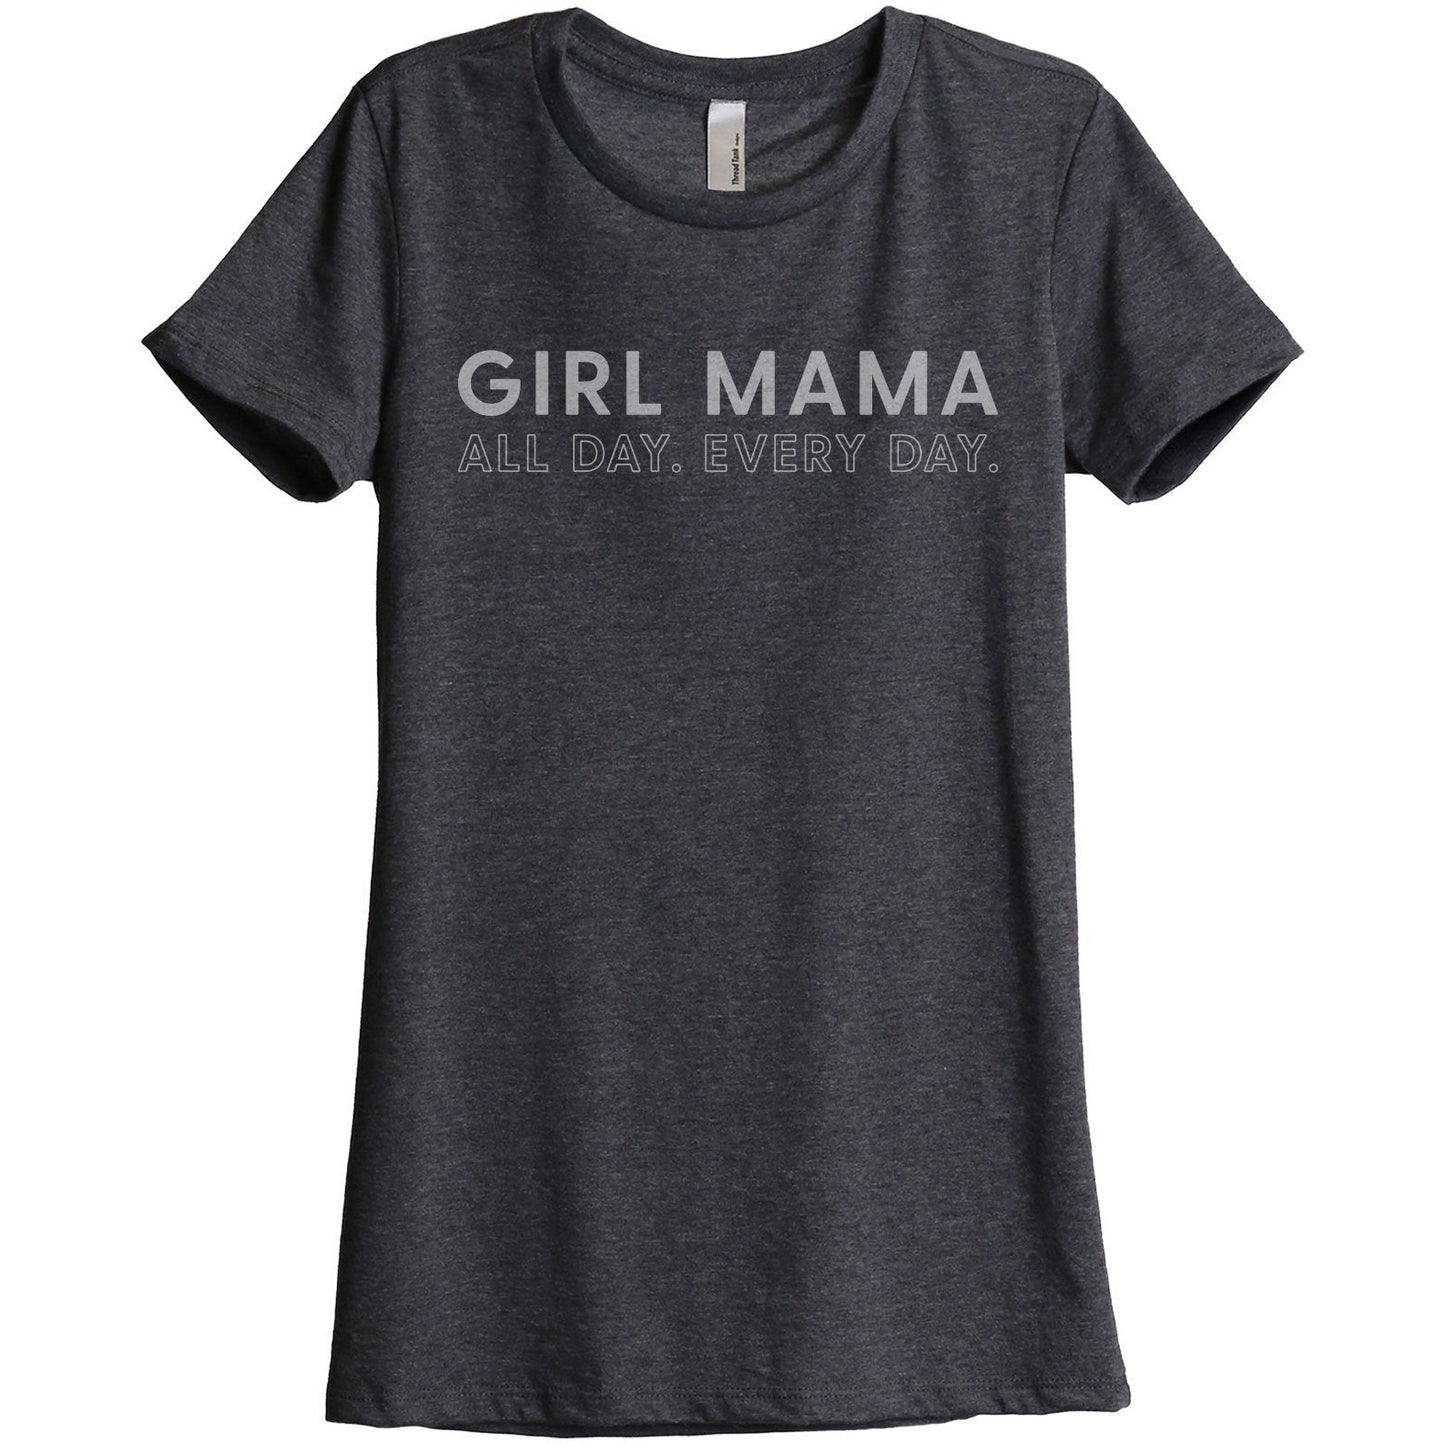 Girl Mama All Day Every Day Women's Relaxed Crewneck T-Shirt Top Tee Charcoal Grey
